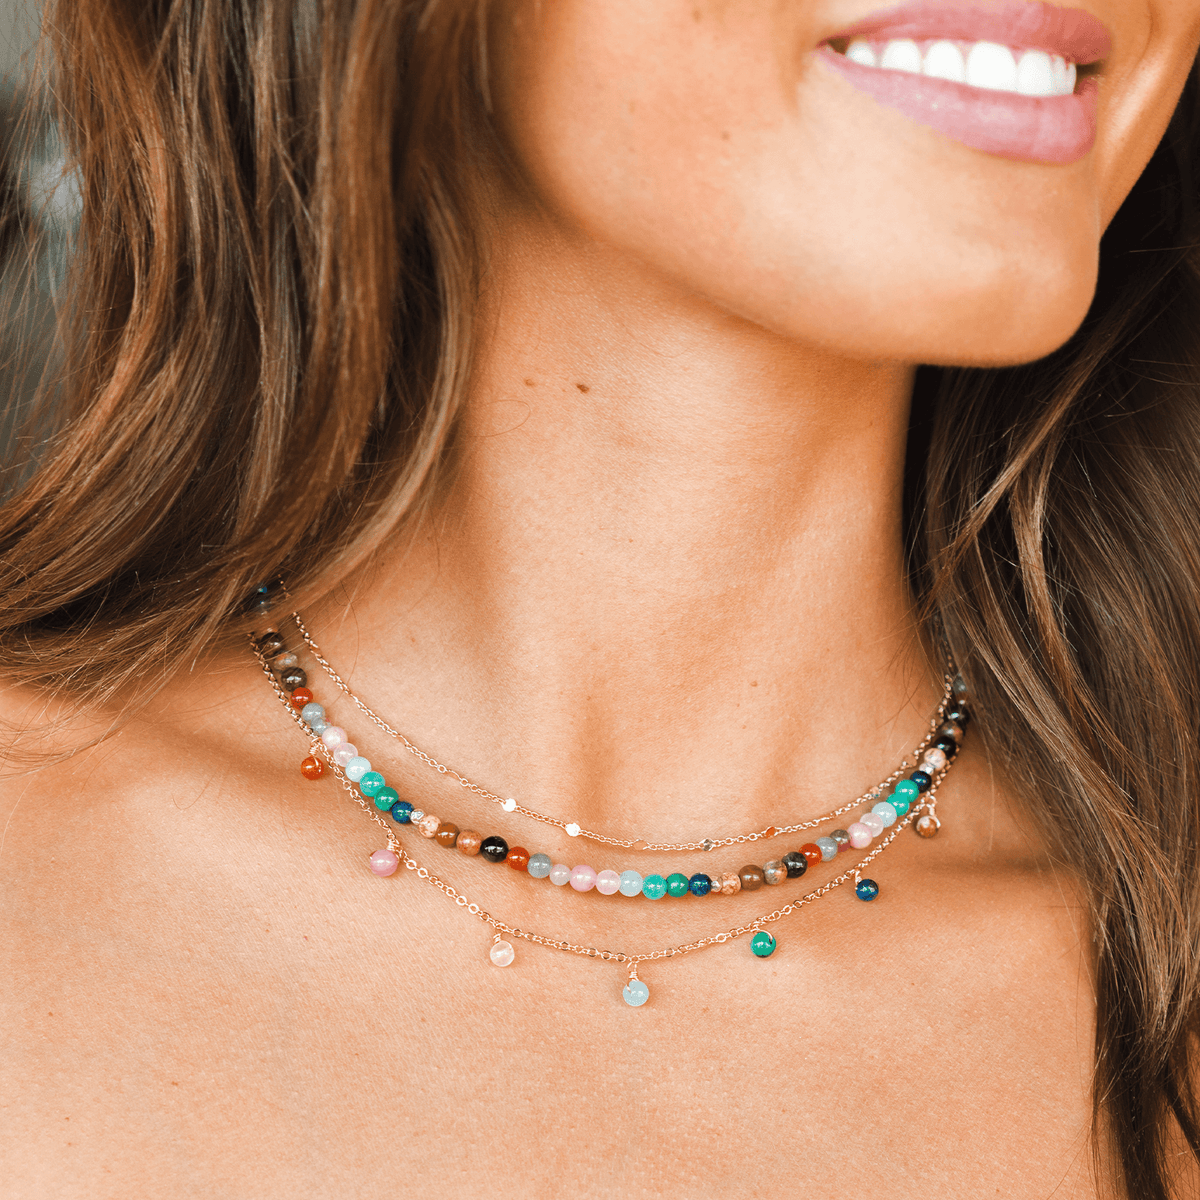 Model wearing a stack of three healing necklaces. The necklaces include a 4mm multicolor stone healing necklace, a gold chain necklace and a gold chain healing necklace with multicolor stone dewdrop charms